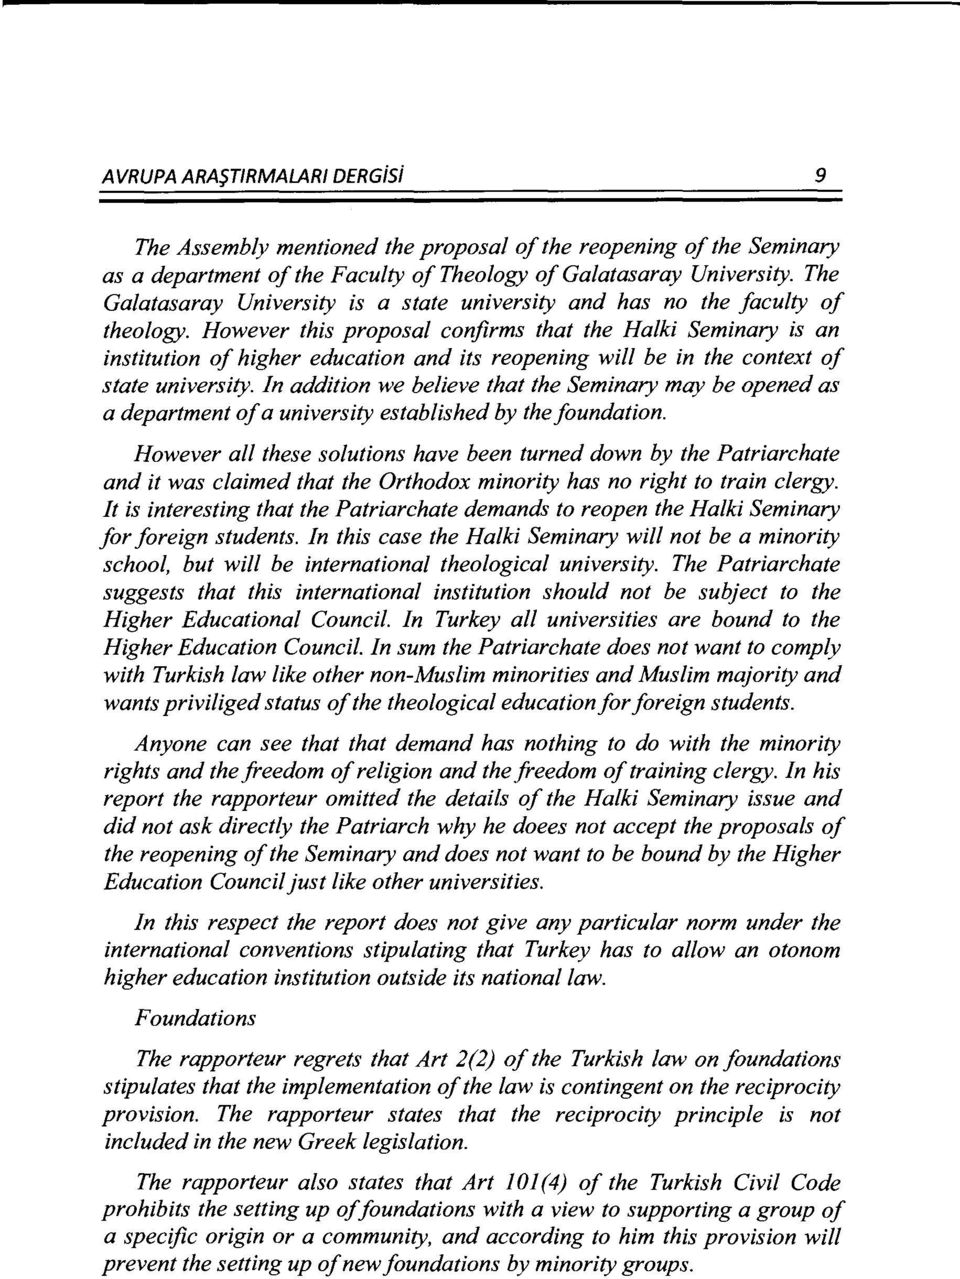 However this proposal confirms that the Halki Seminary is an institution of higher education and its reopening will be in the context of state university.